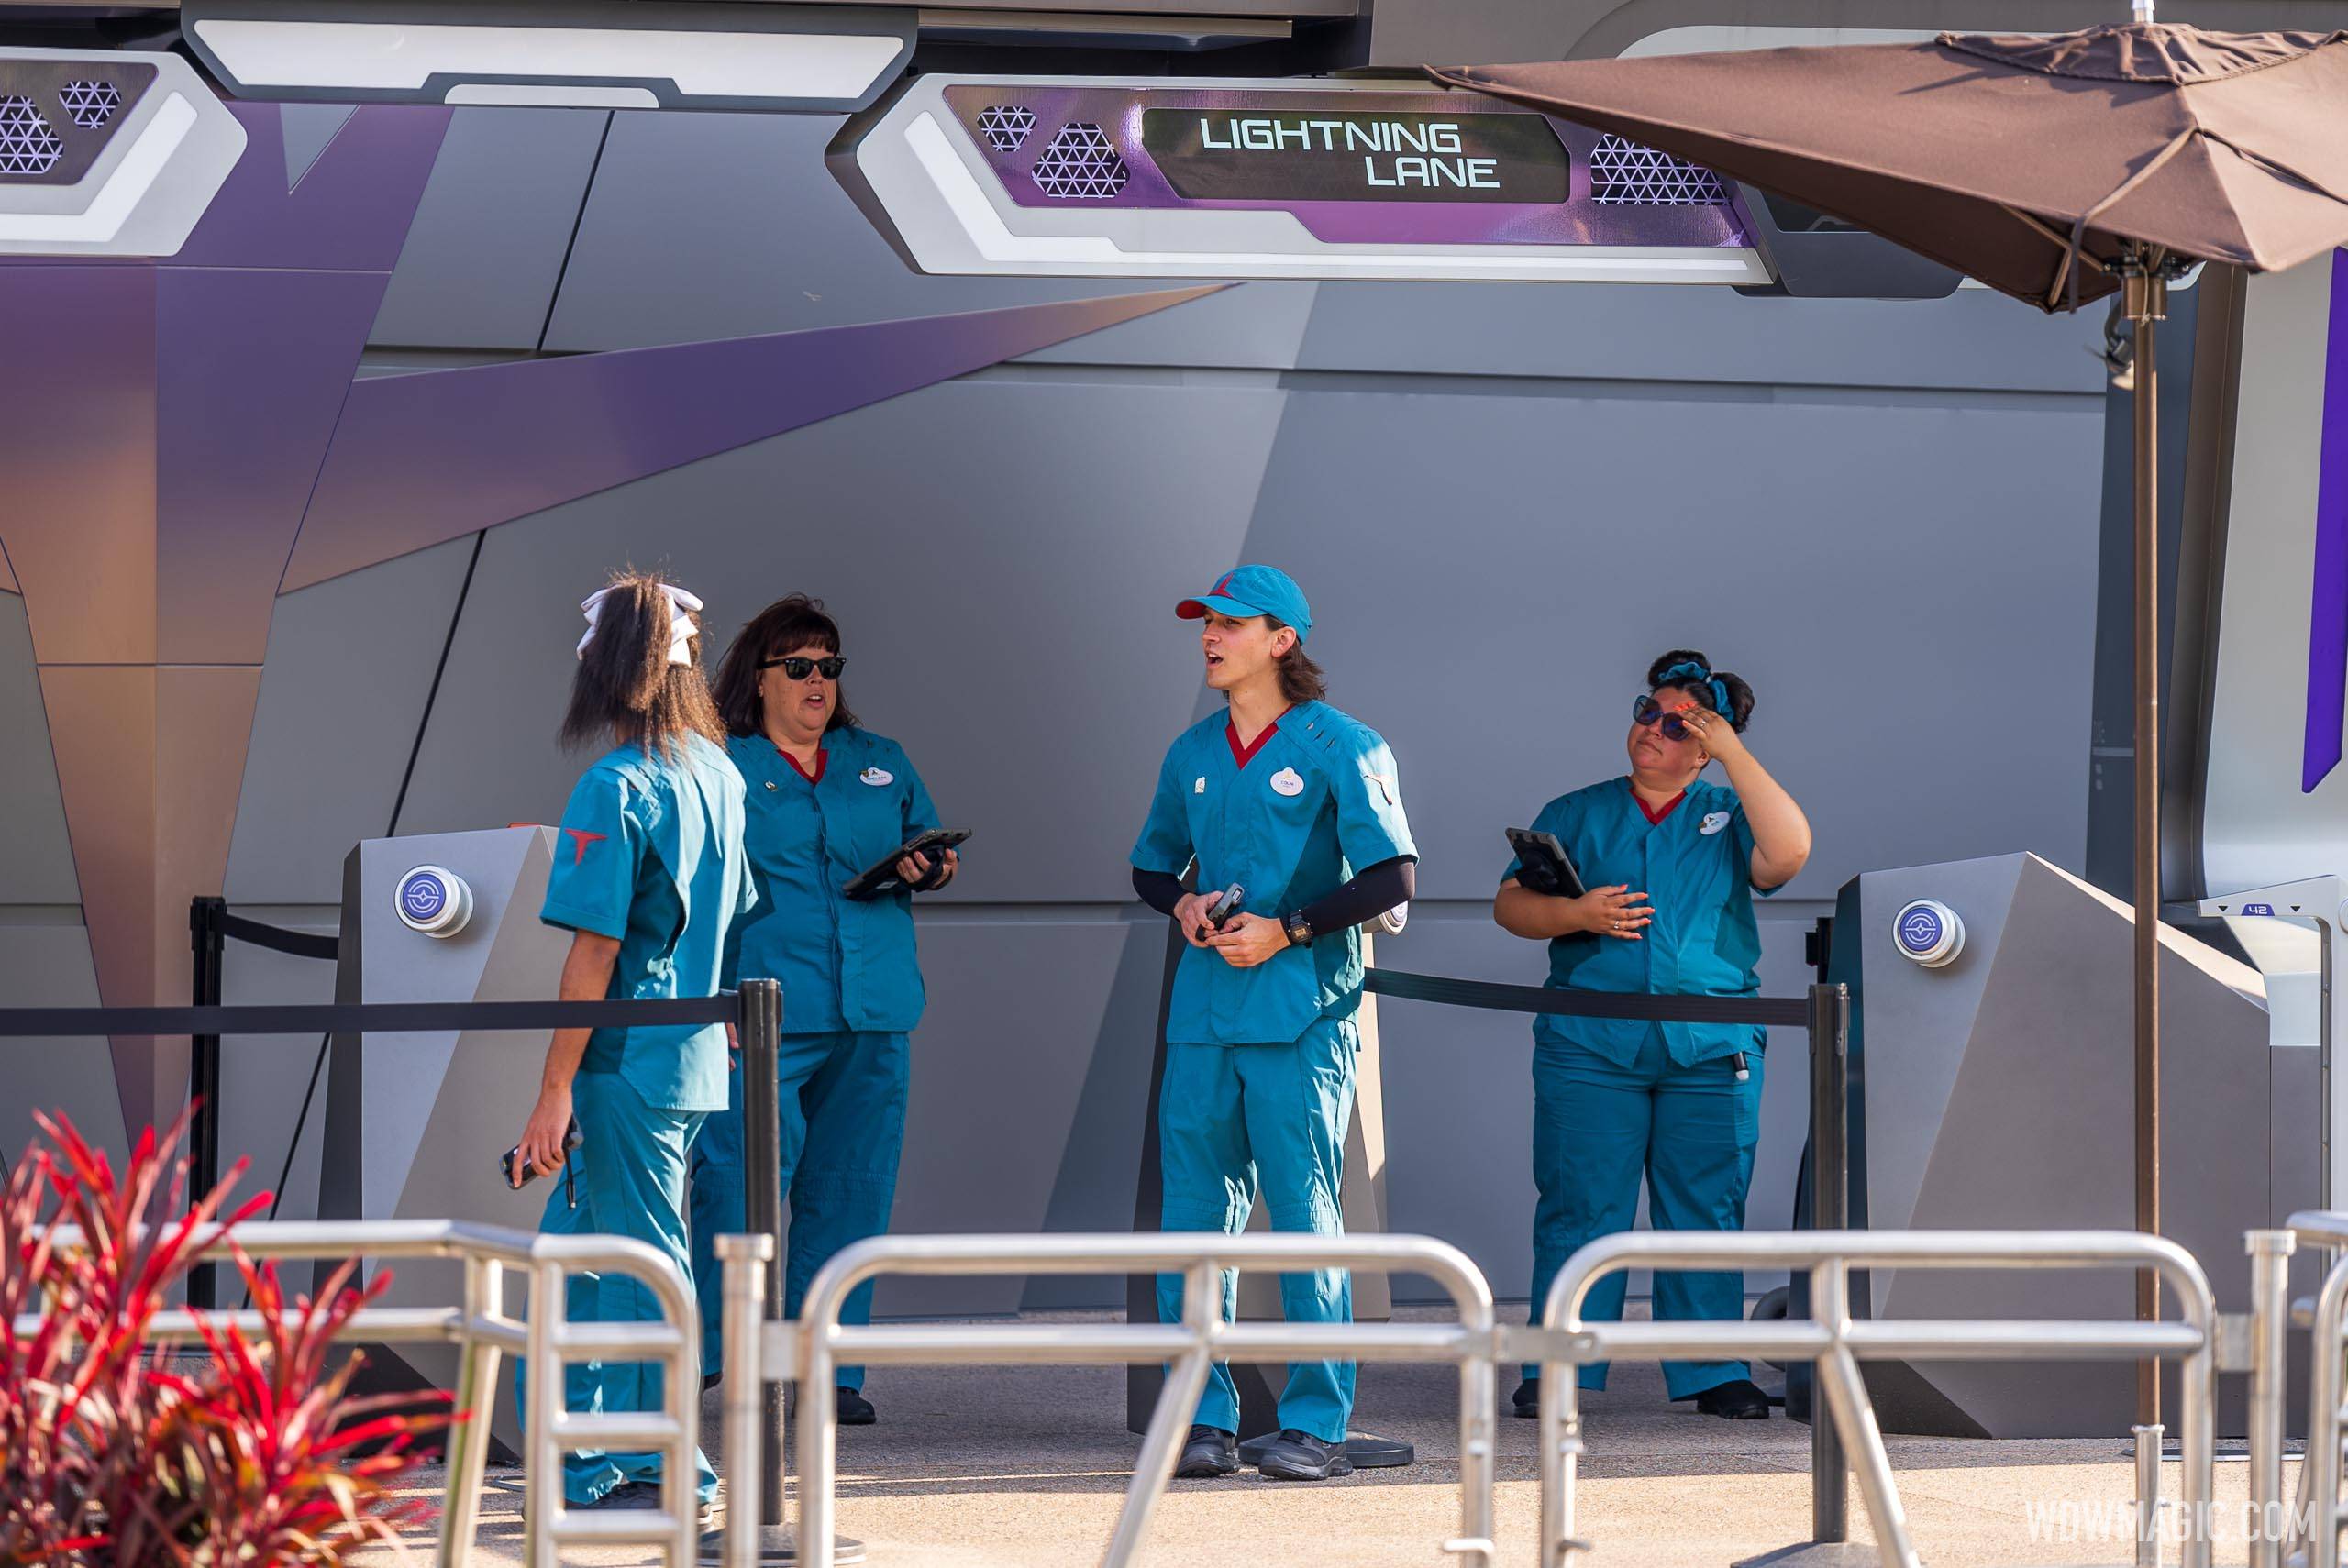 Guardians of the Galaxy Cosmic Rewind Virtual Queue and Lightning Lane signs